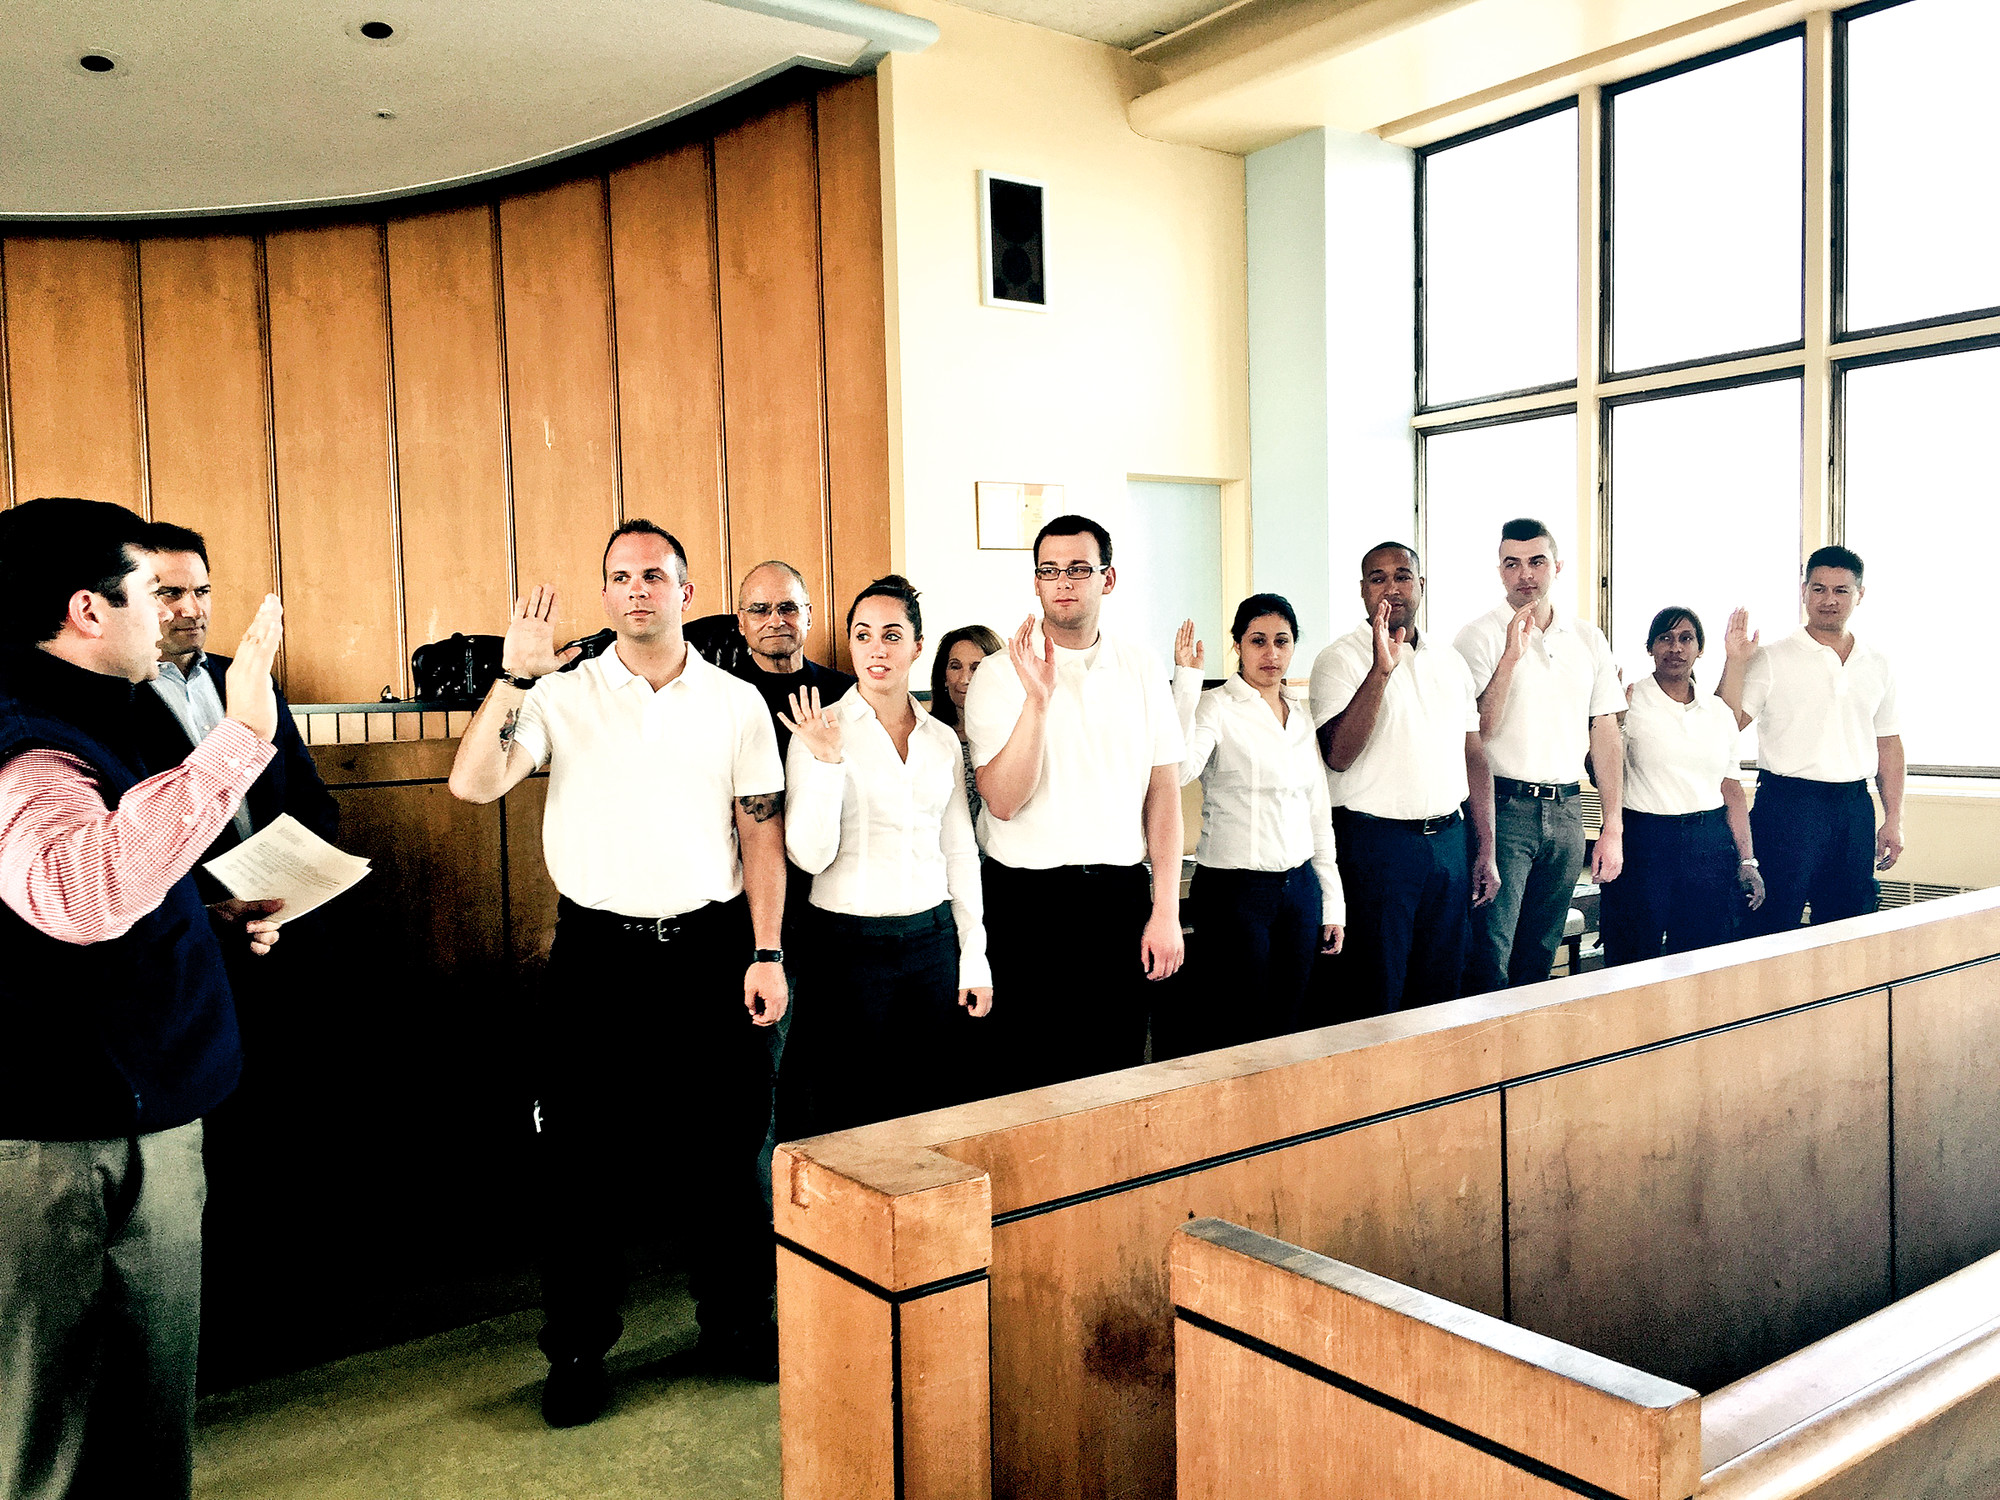 City Manager Jack Schnirman swore in the new paramedics last week.